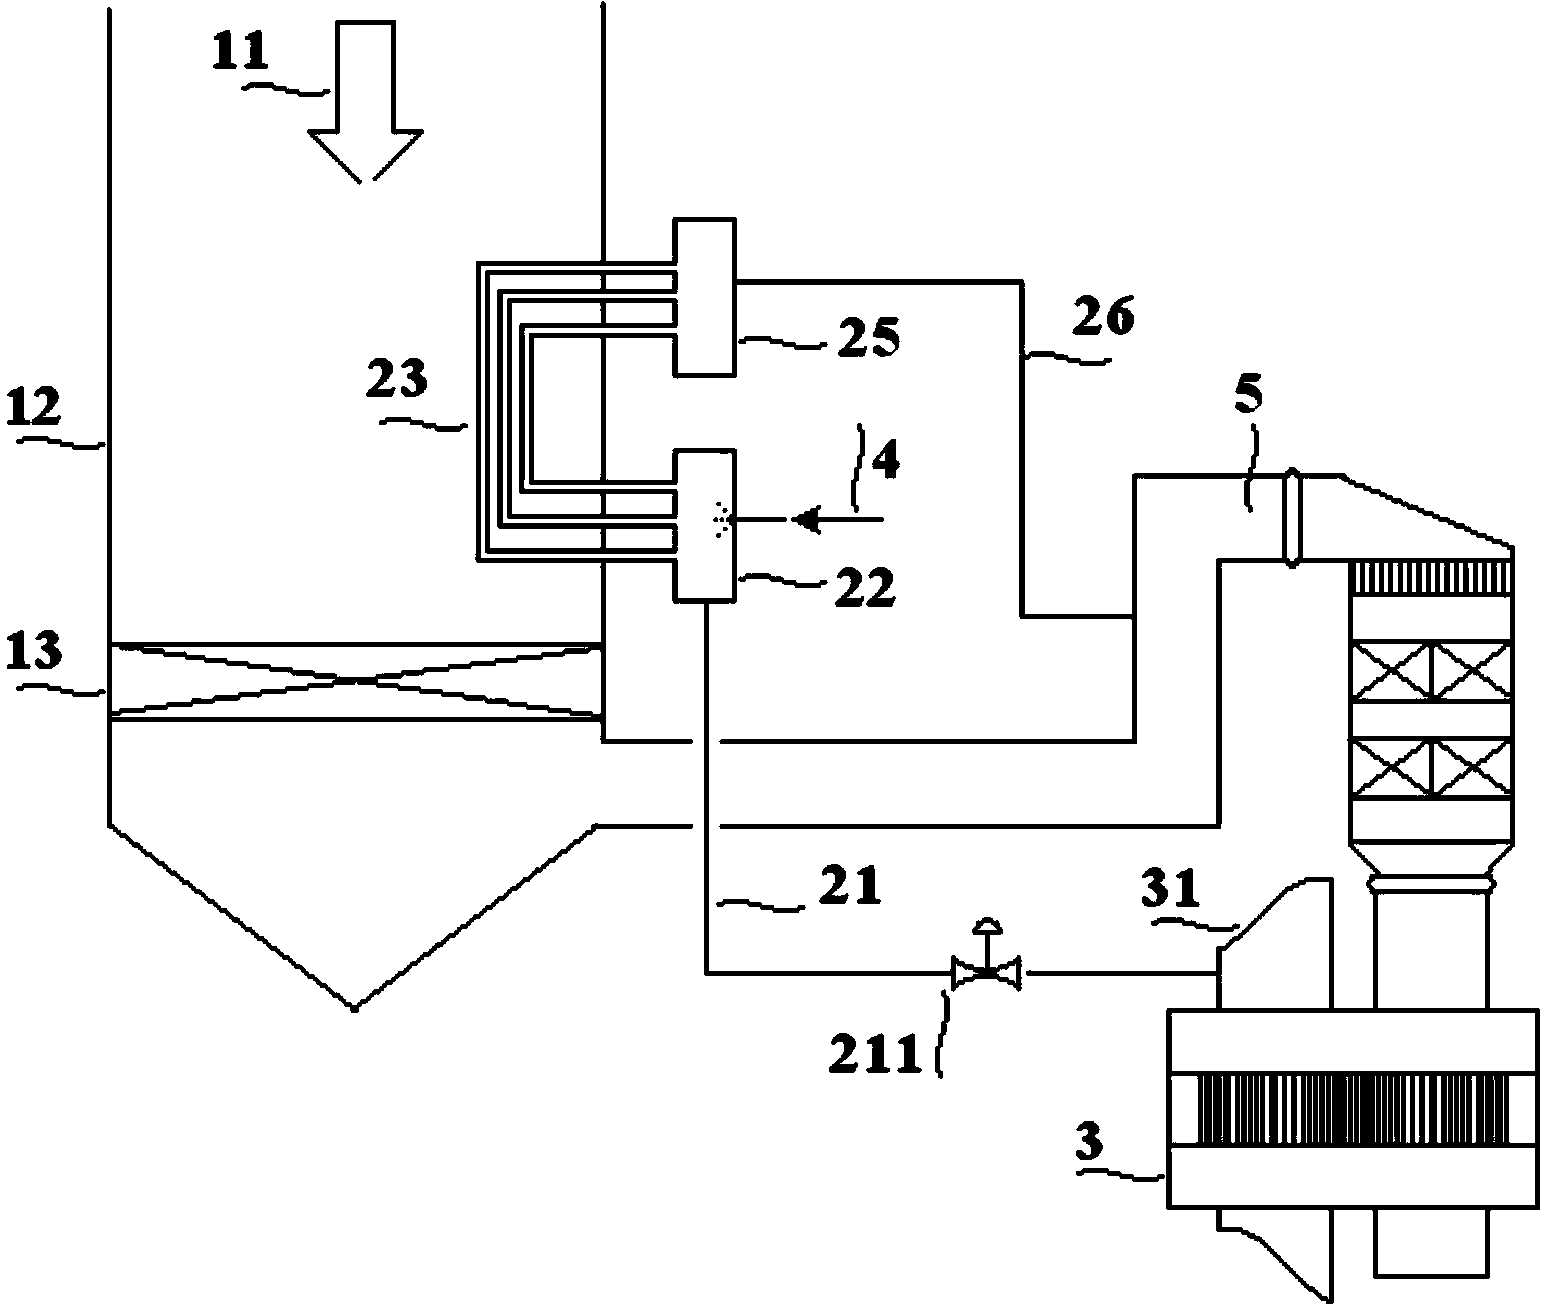 SCR (Selective Catalytic Reduction) denitration method and device with urea pyrolysis pipes in boiler